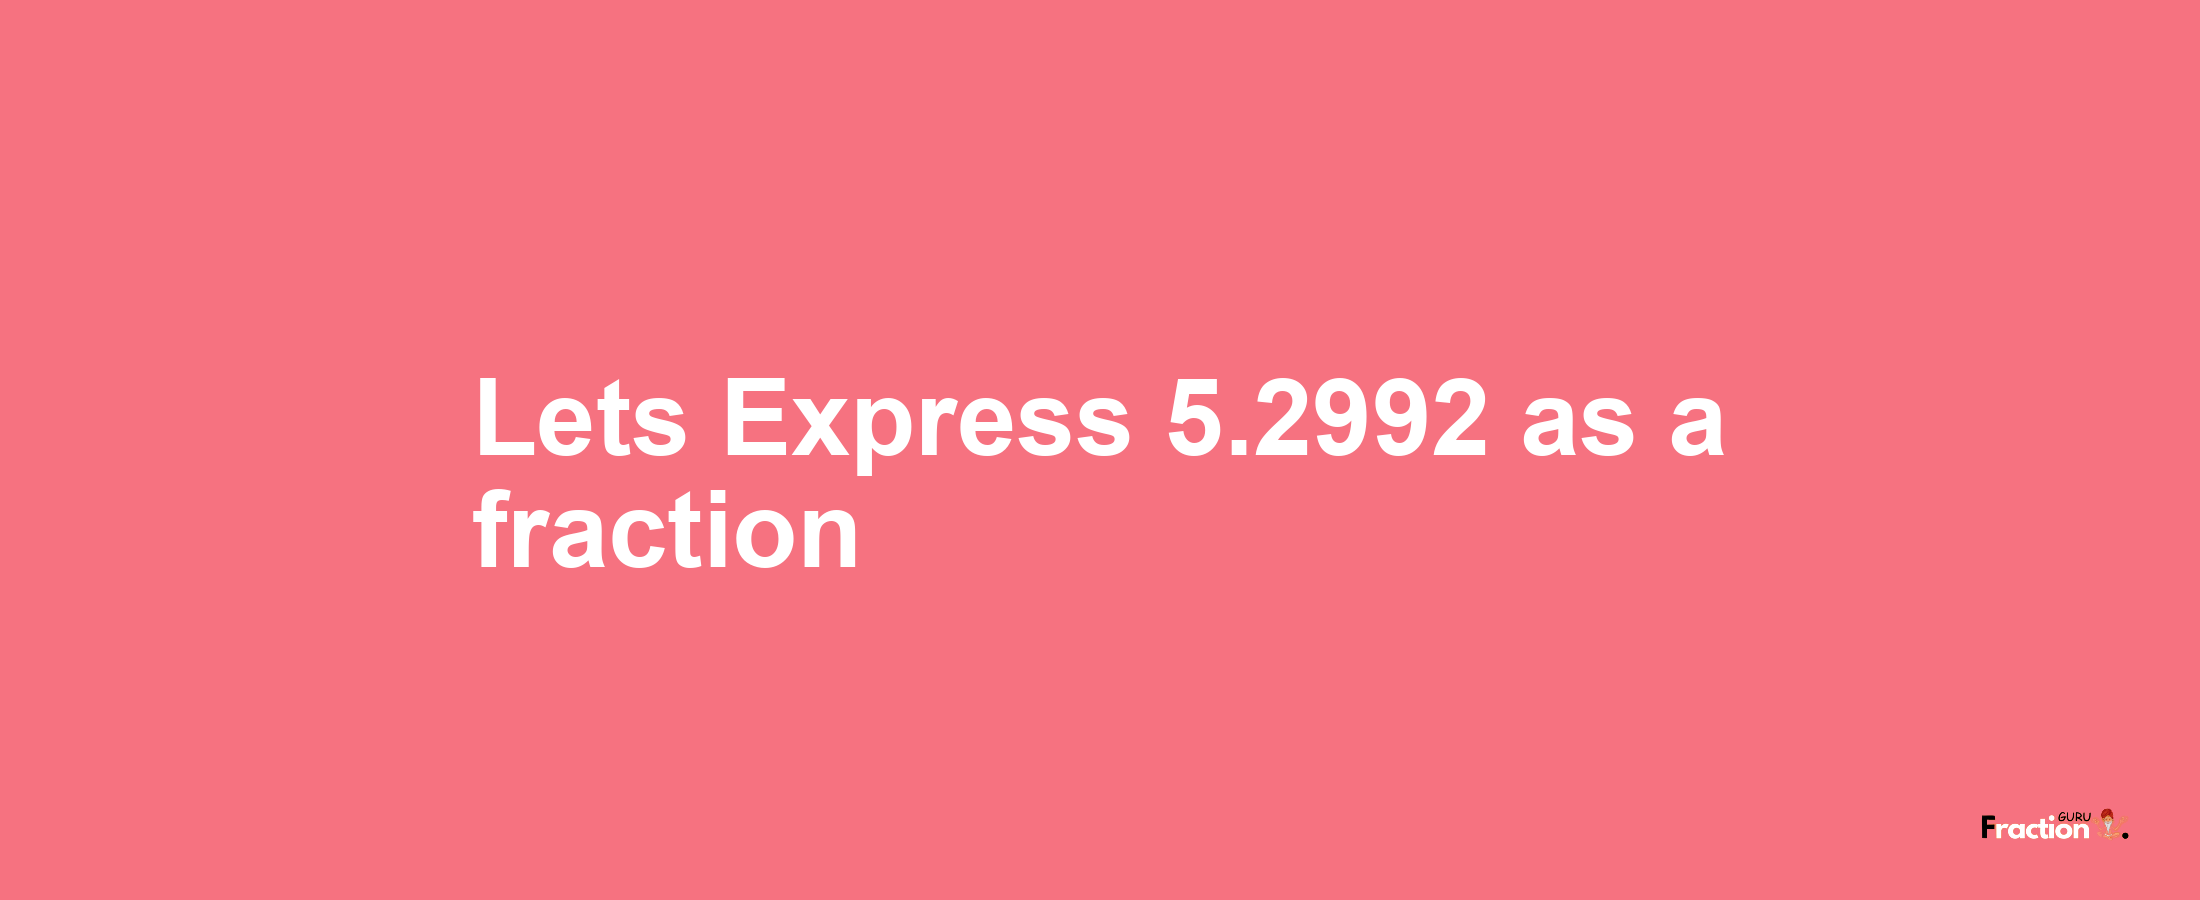 Lets Express 5.2992 as afraction